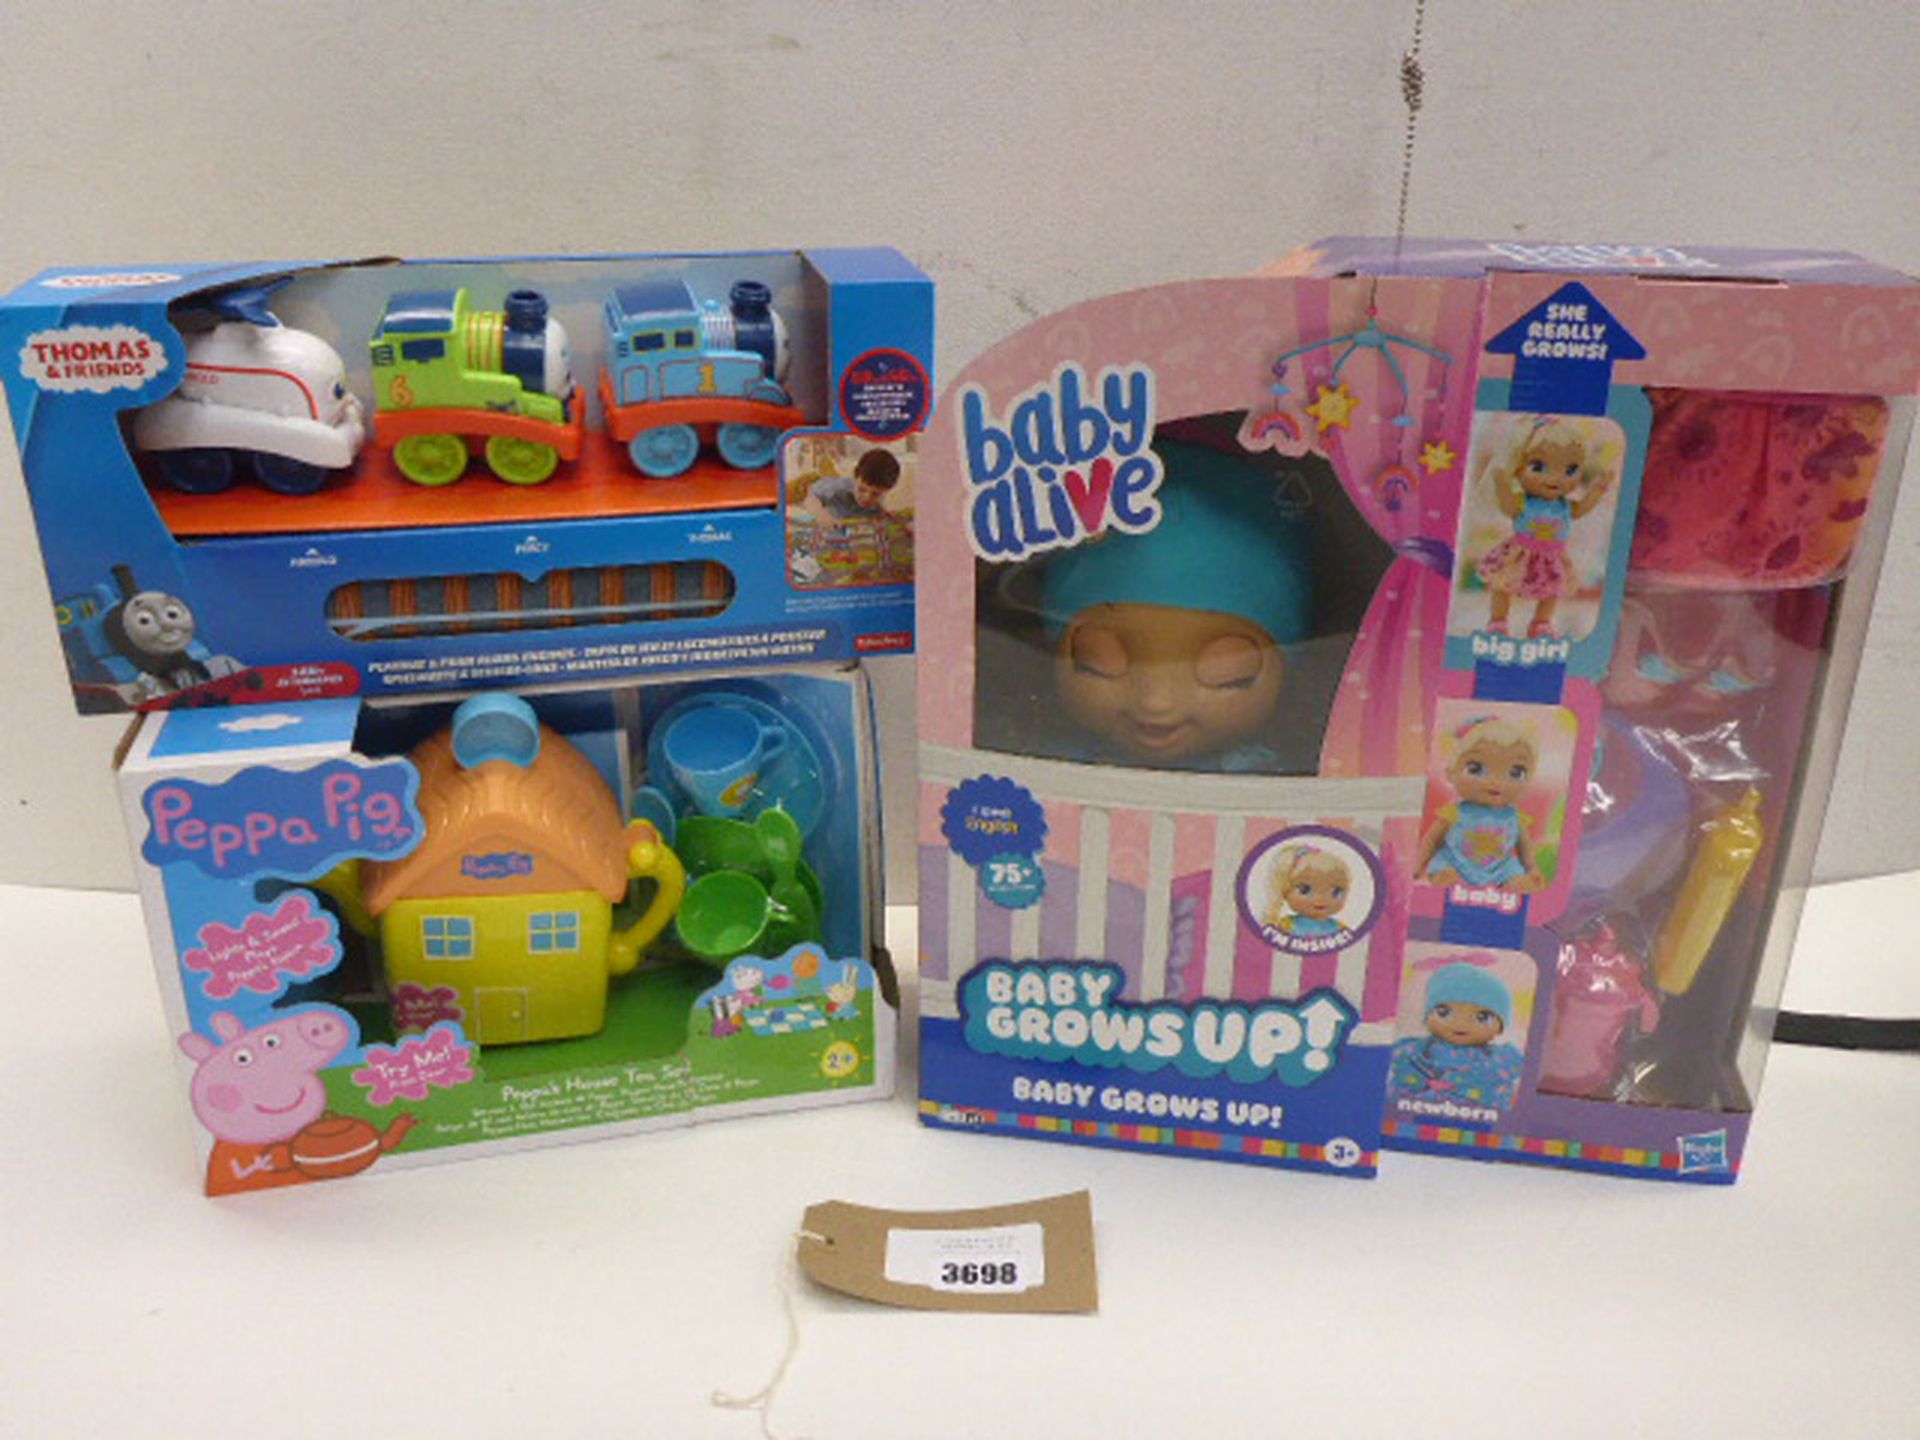 Baby Alive Baby Grows Up! doll, Peppa Pig tea set and Thomas & Friends Playmat & push along friends